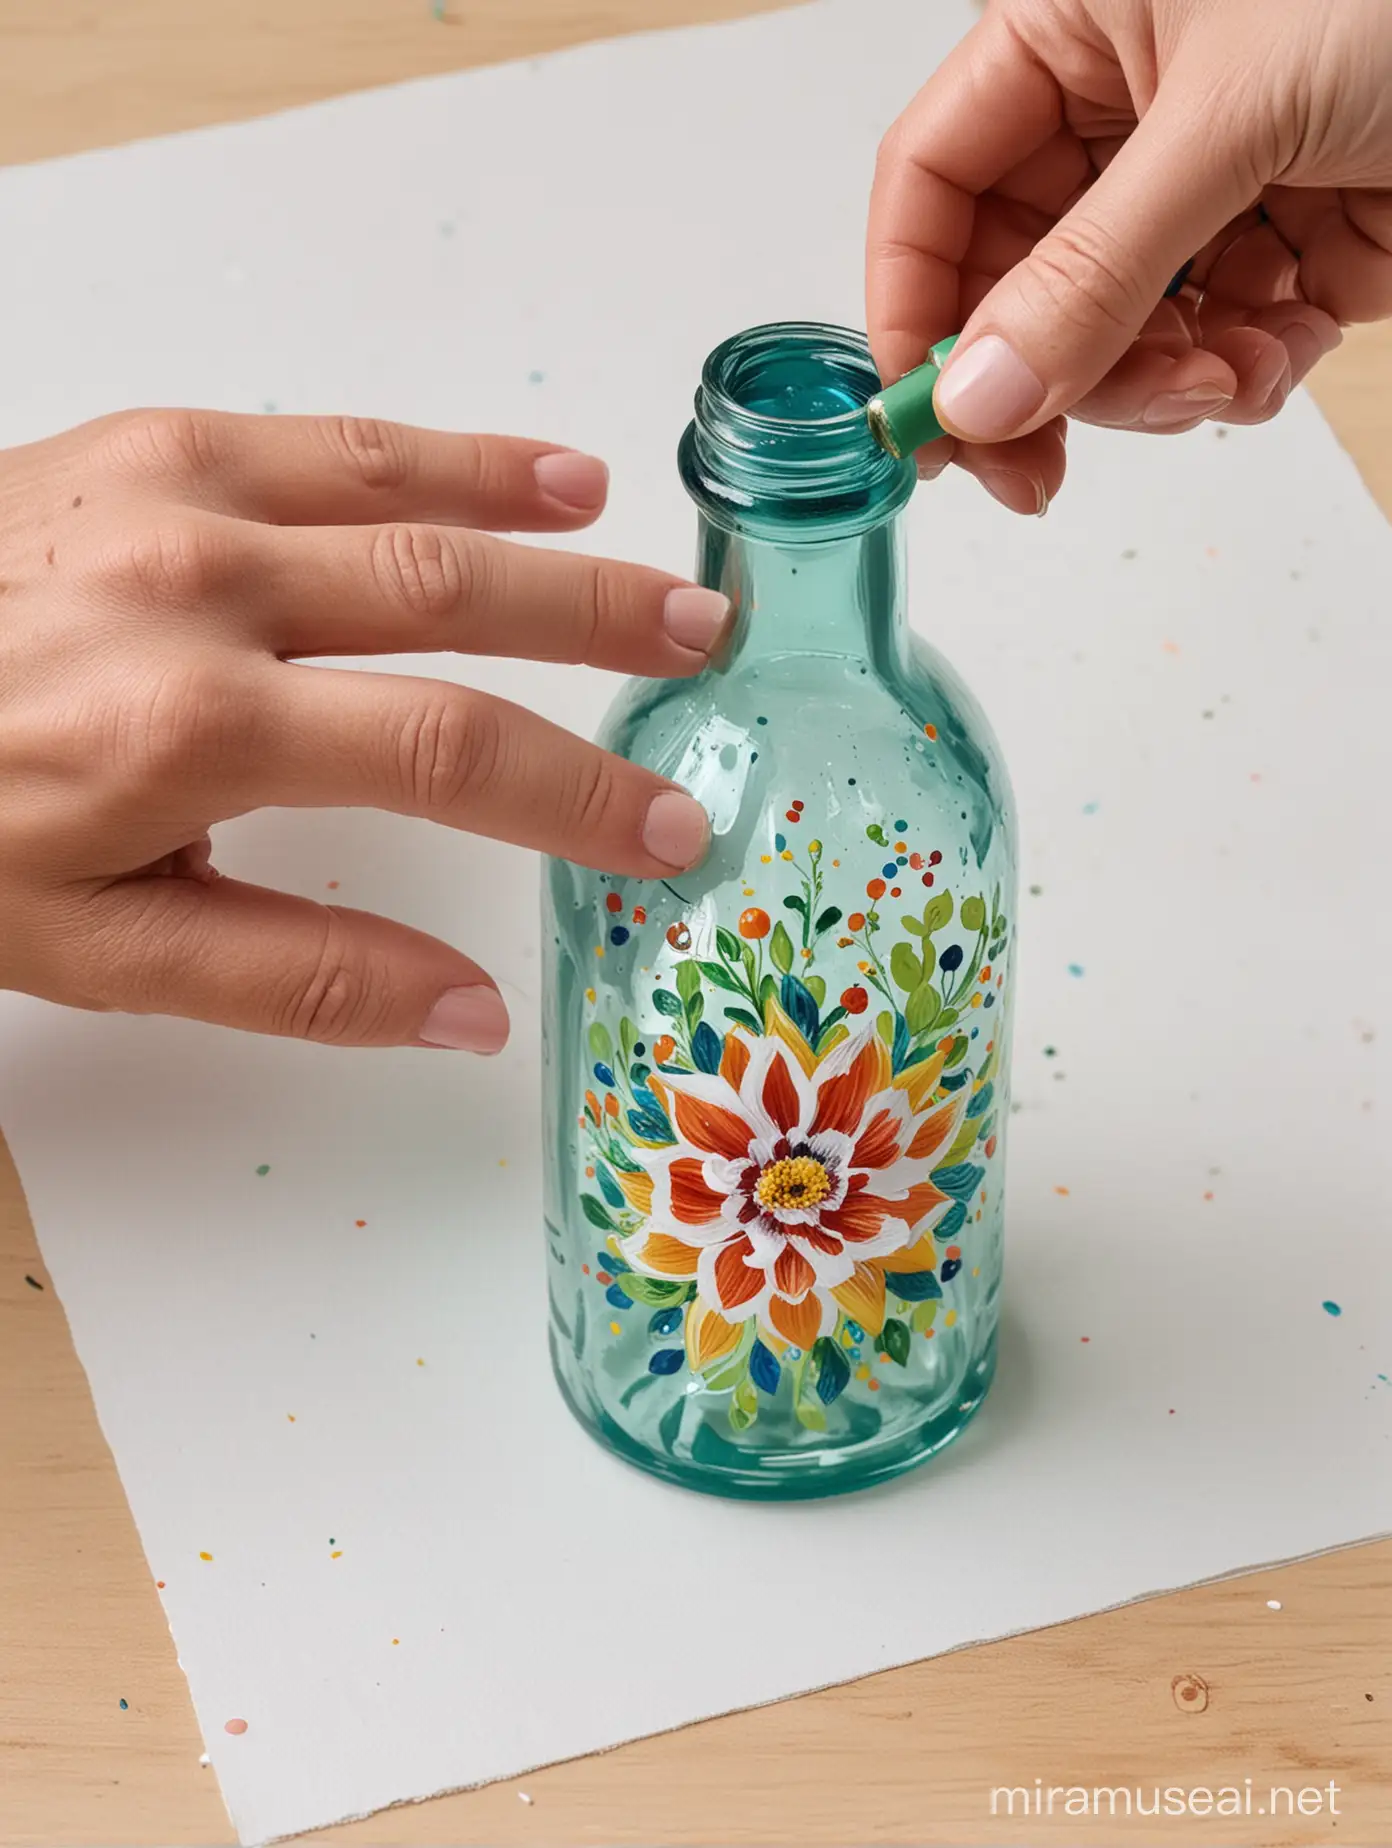 A hand, painting a glass bottle with acrylic paints